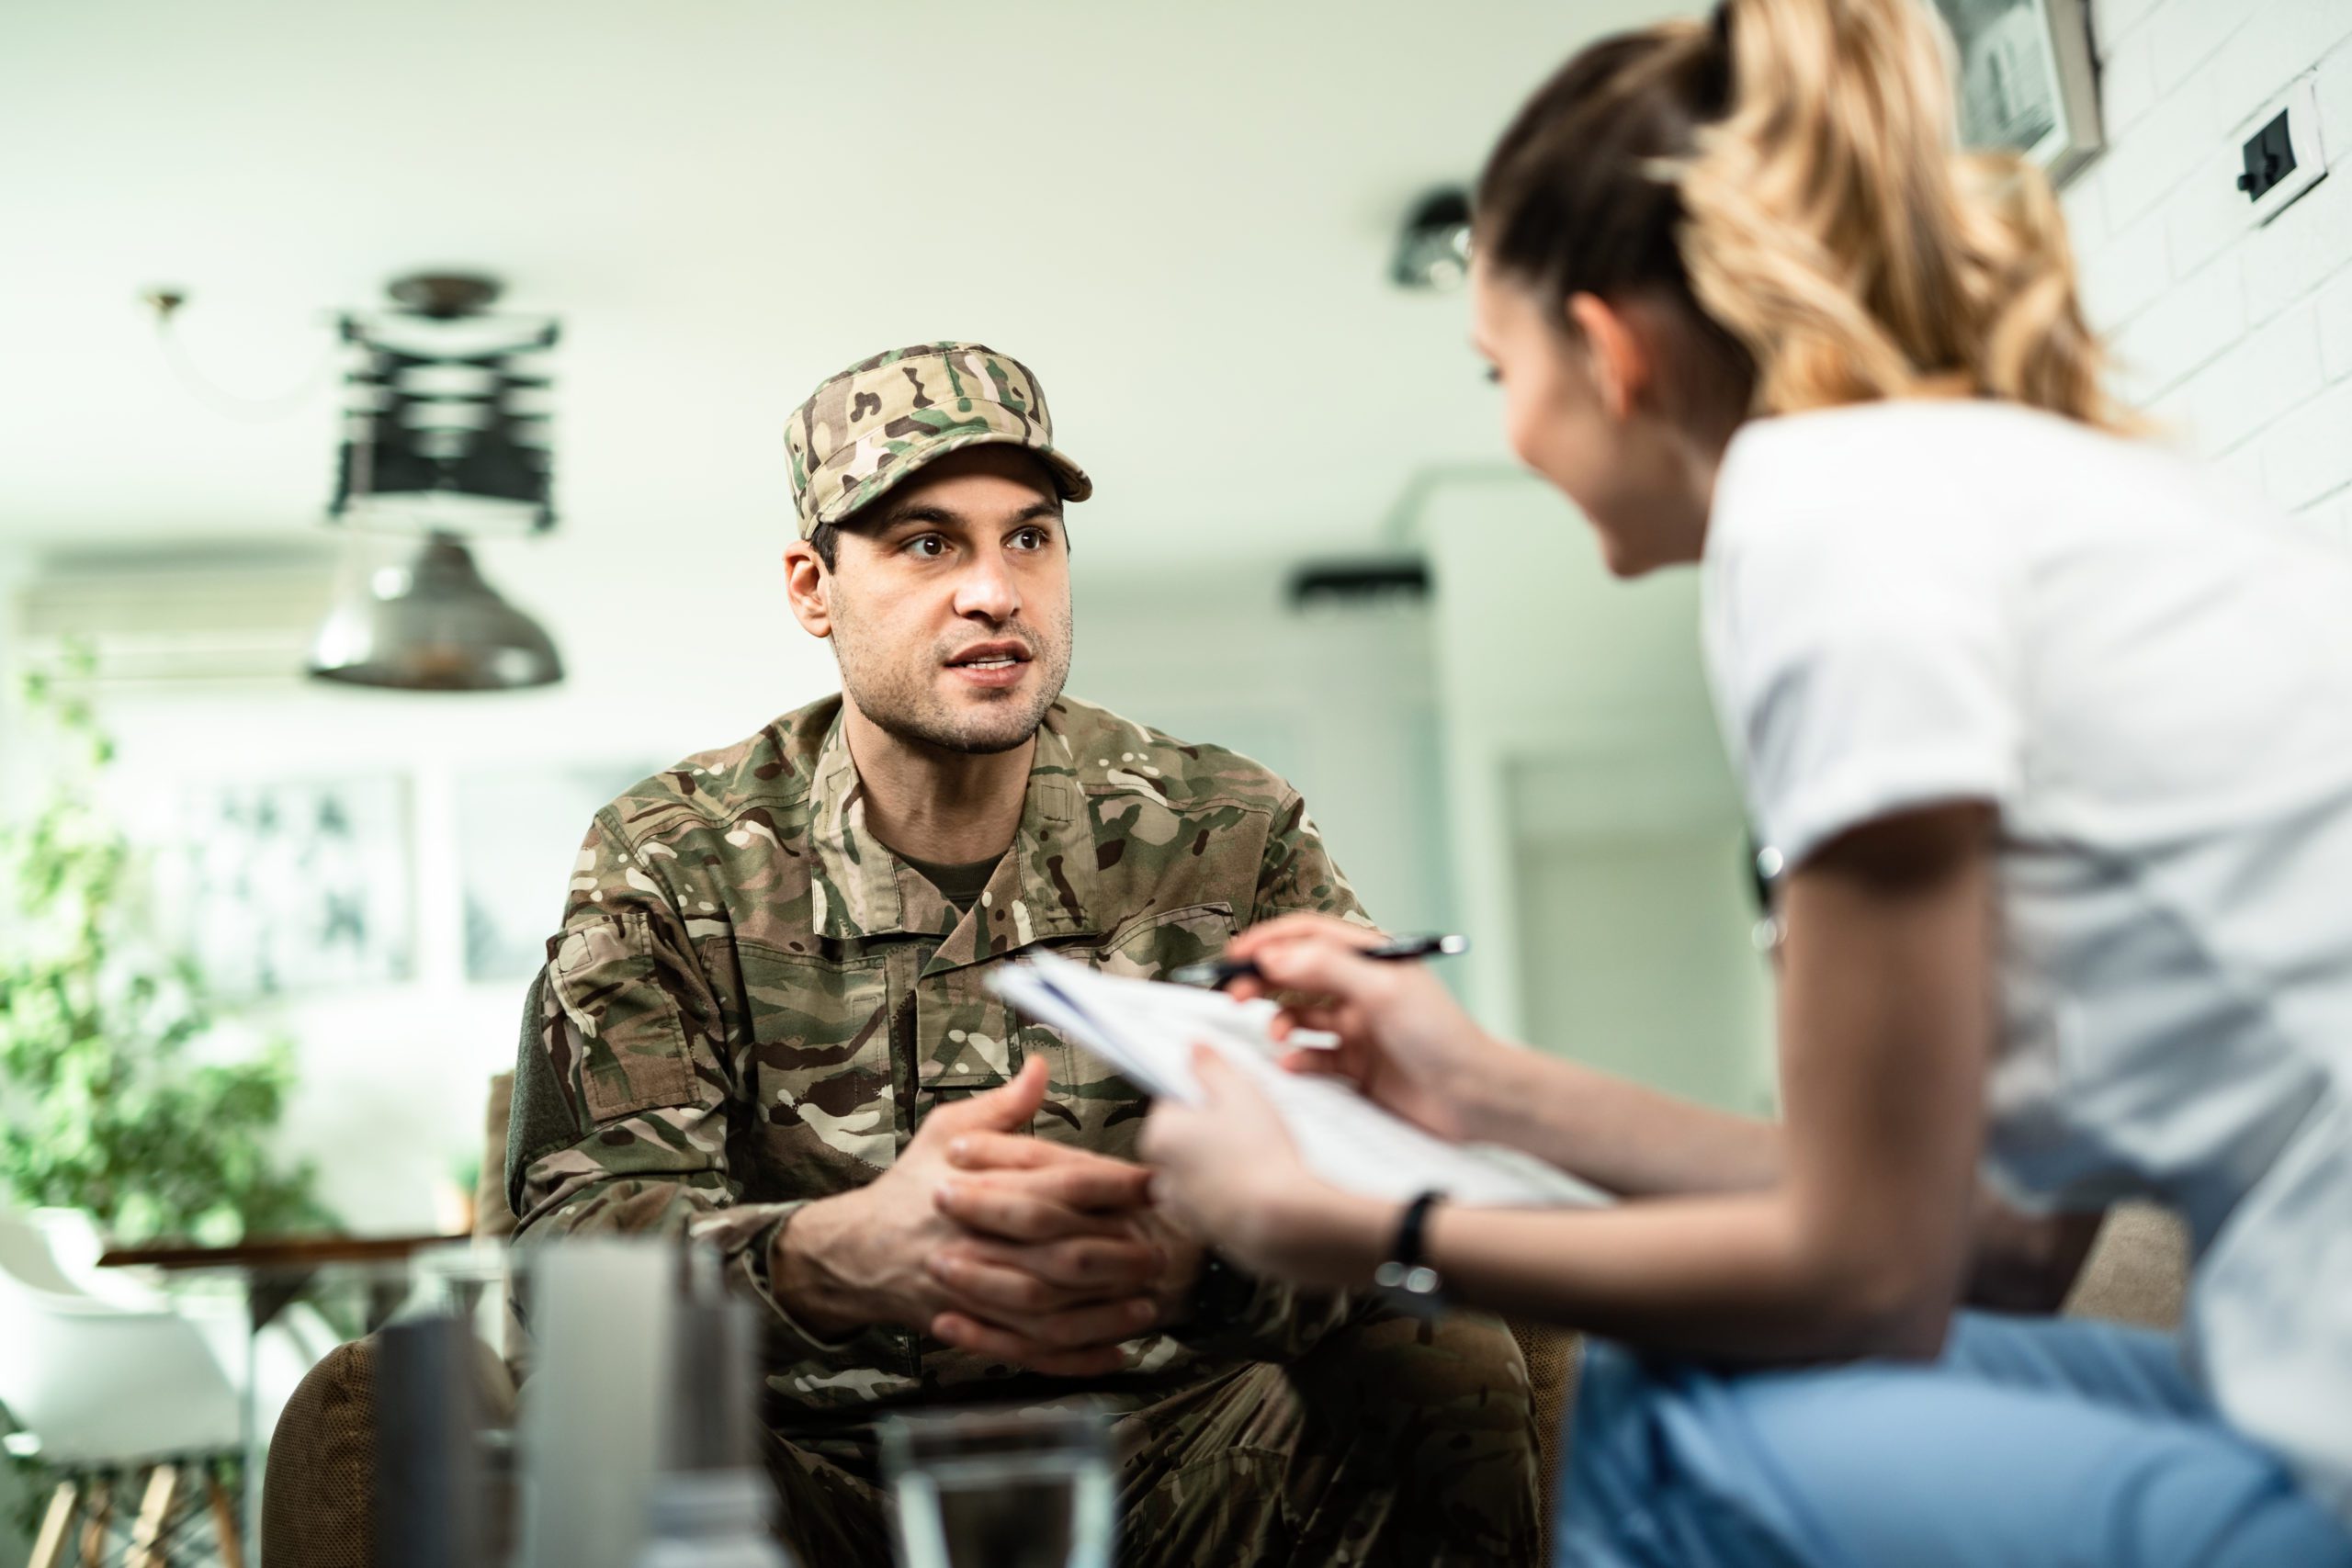 6 veteran healthcare statistics that are important to understand